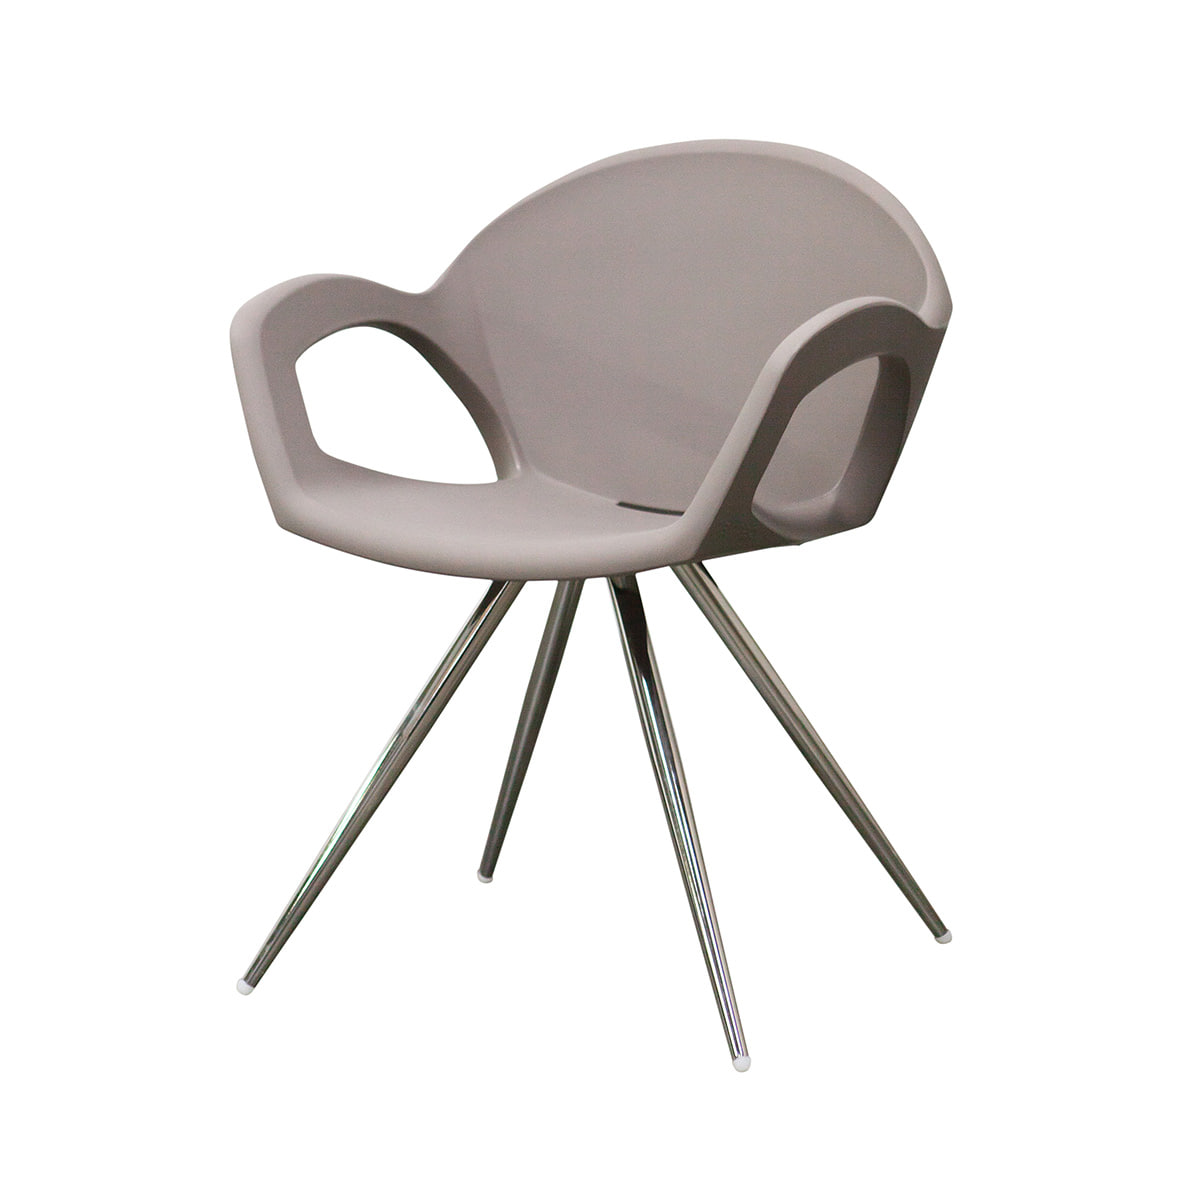 PF STILEPepper Chair  페퍼 체어 (카푸치노)  MADE IN ITALY